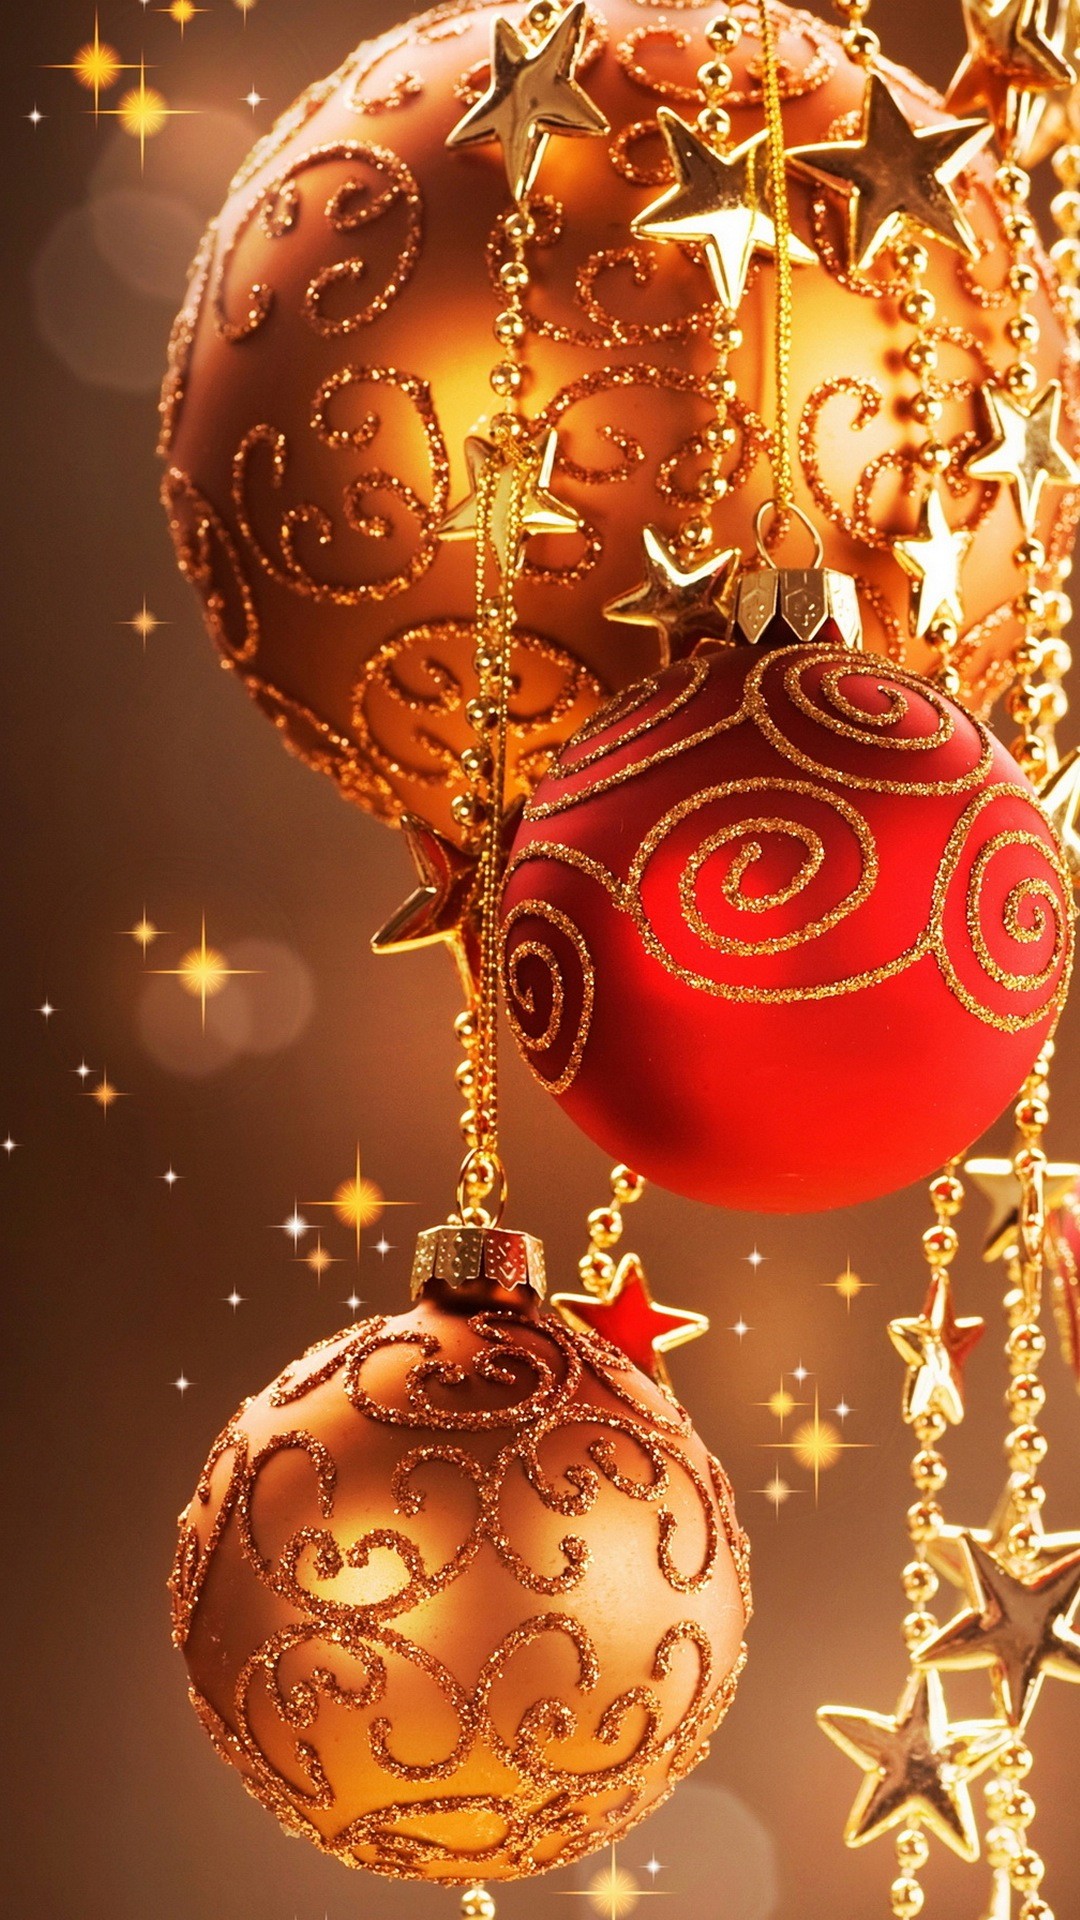 Girly Christmas Wallpapers (60+ images)